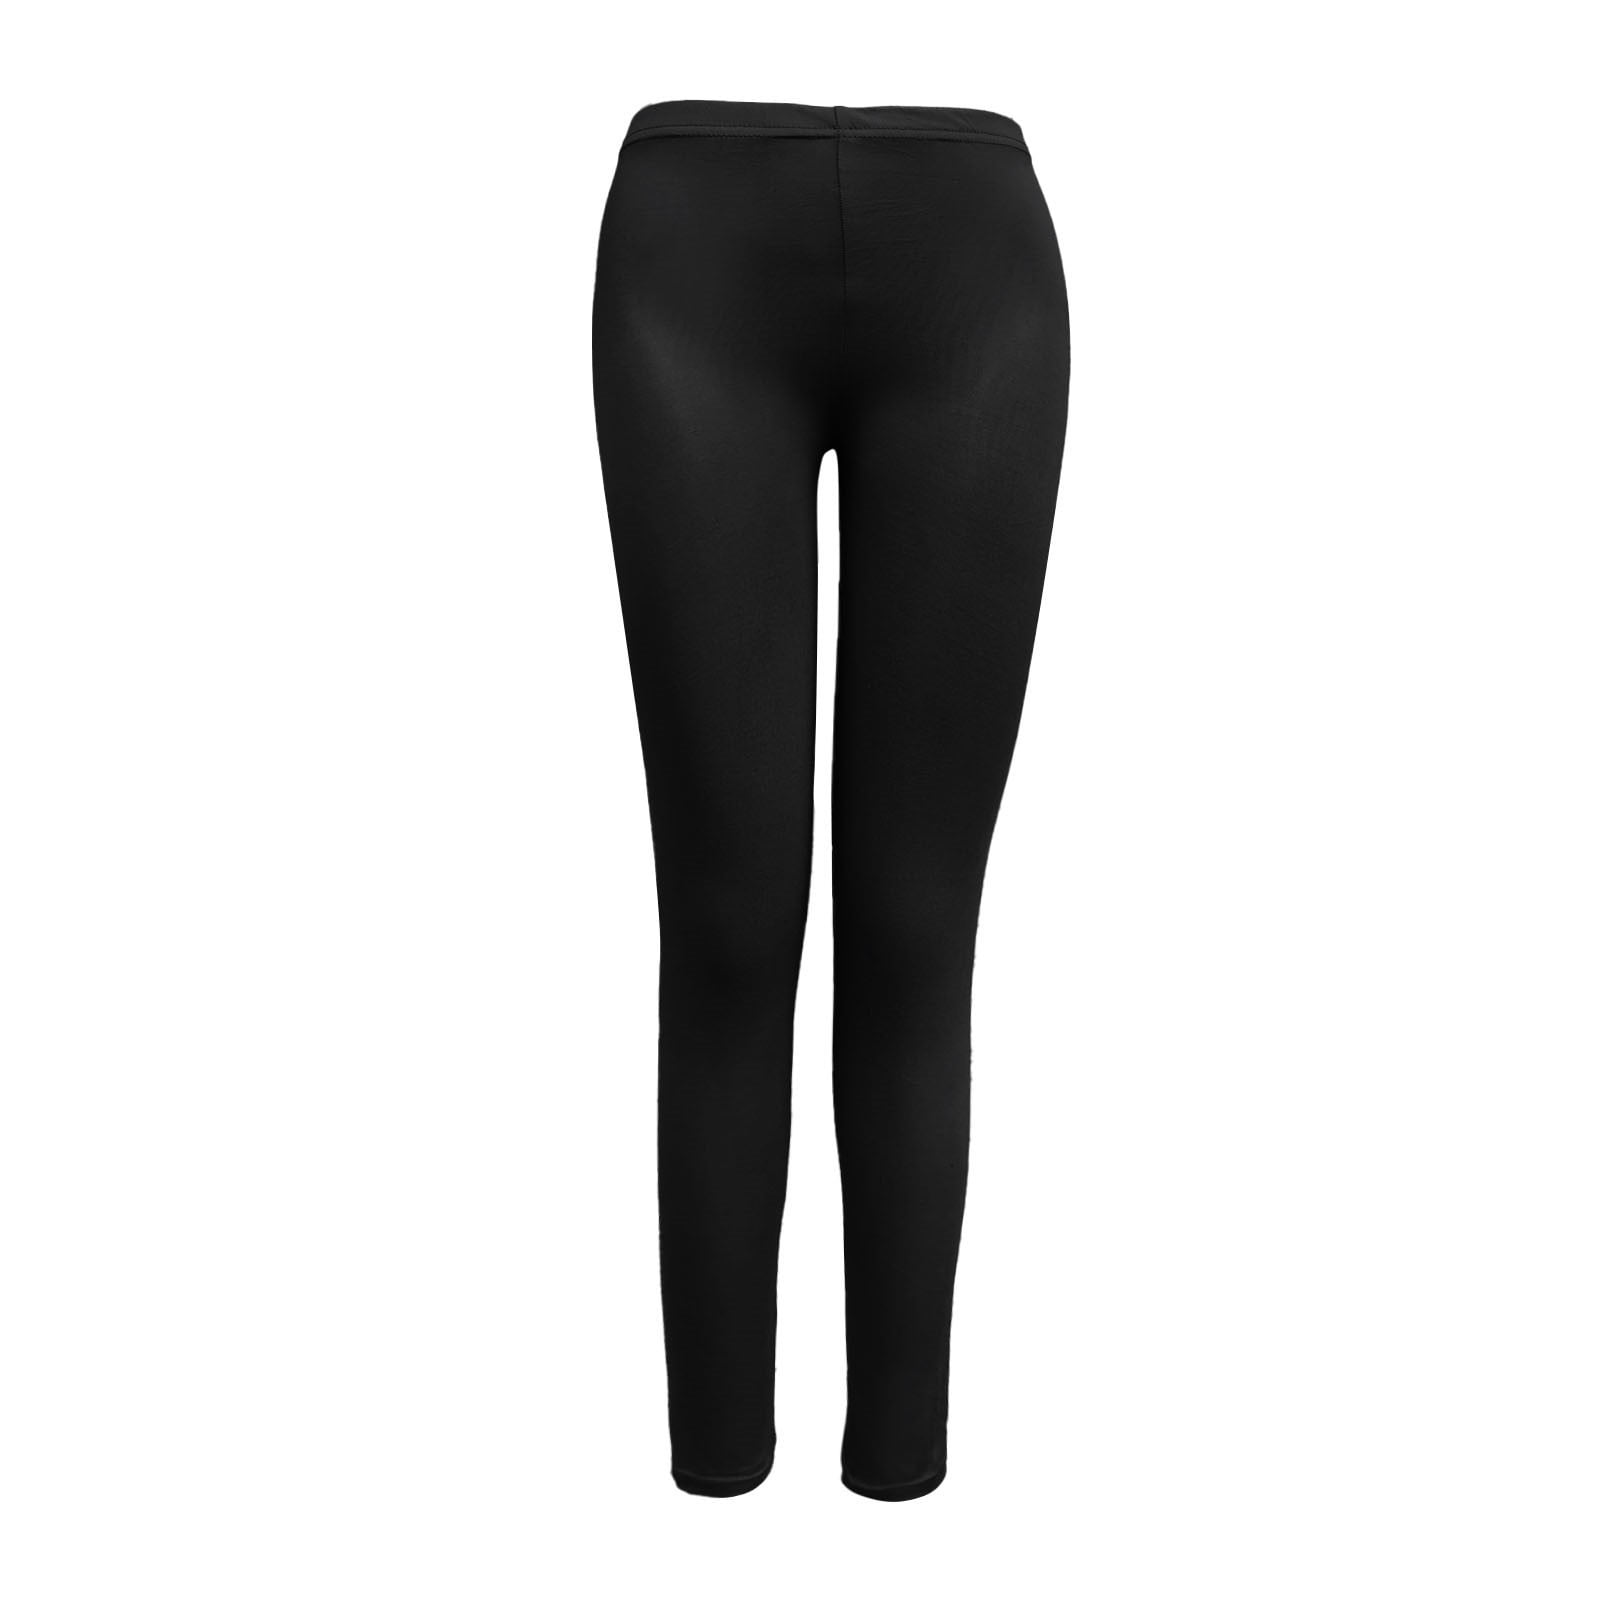 Outfmvch Yoga Pants Women Sweatpants Women Polyester Relaxed Pull-On ...